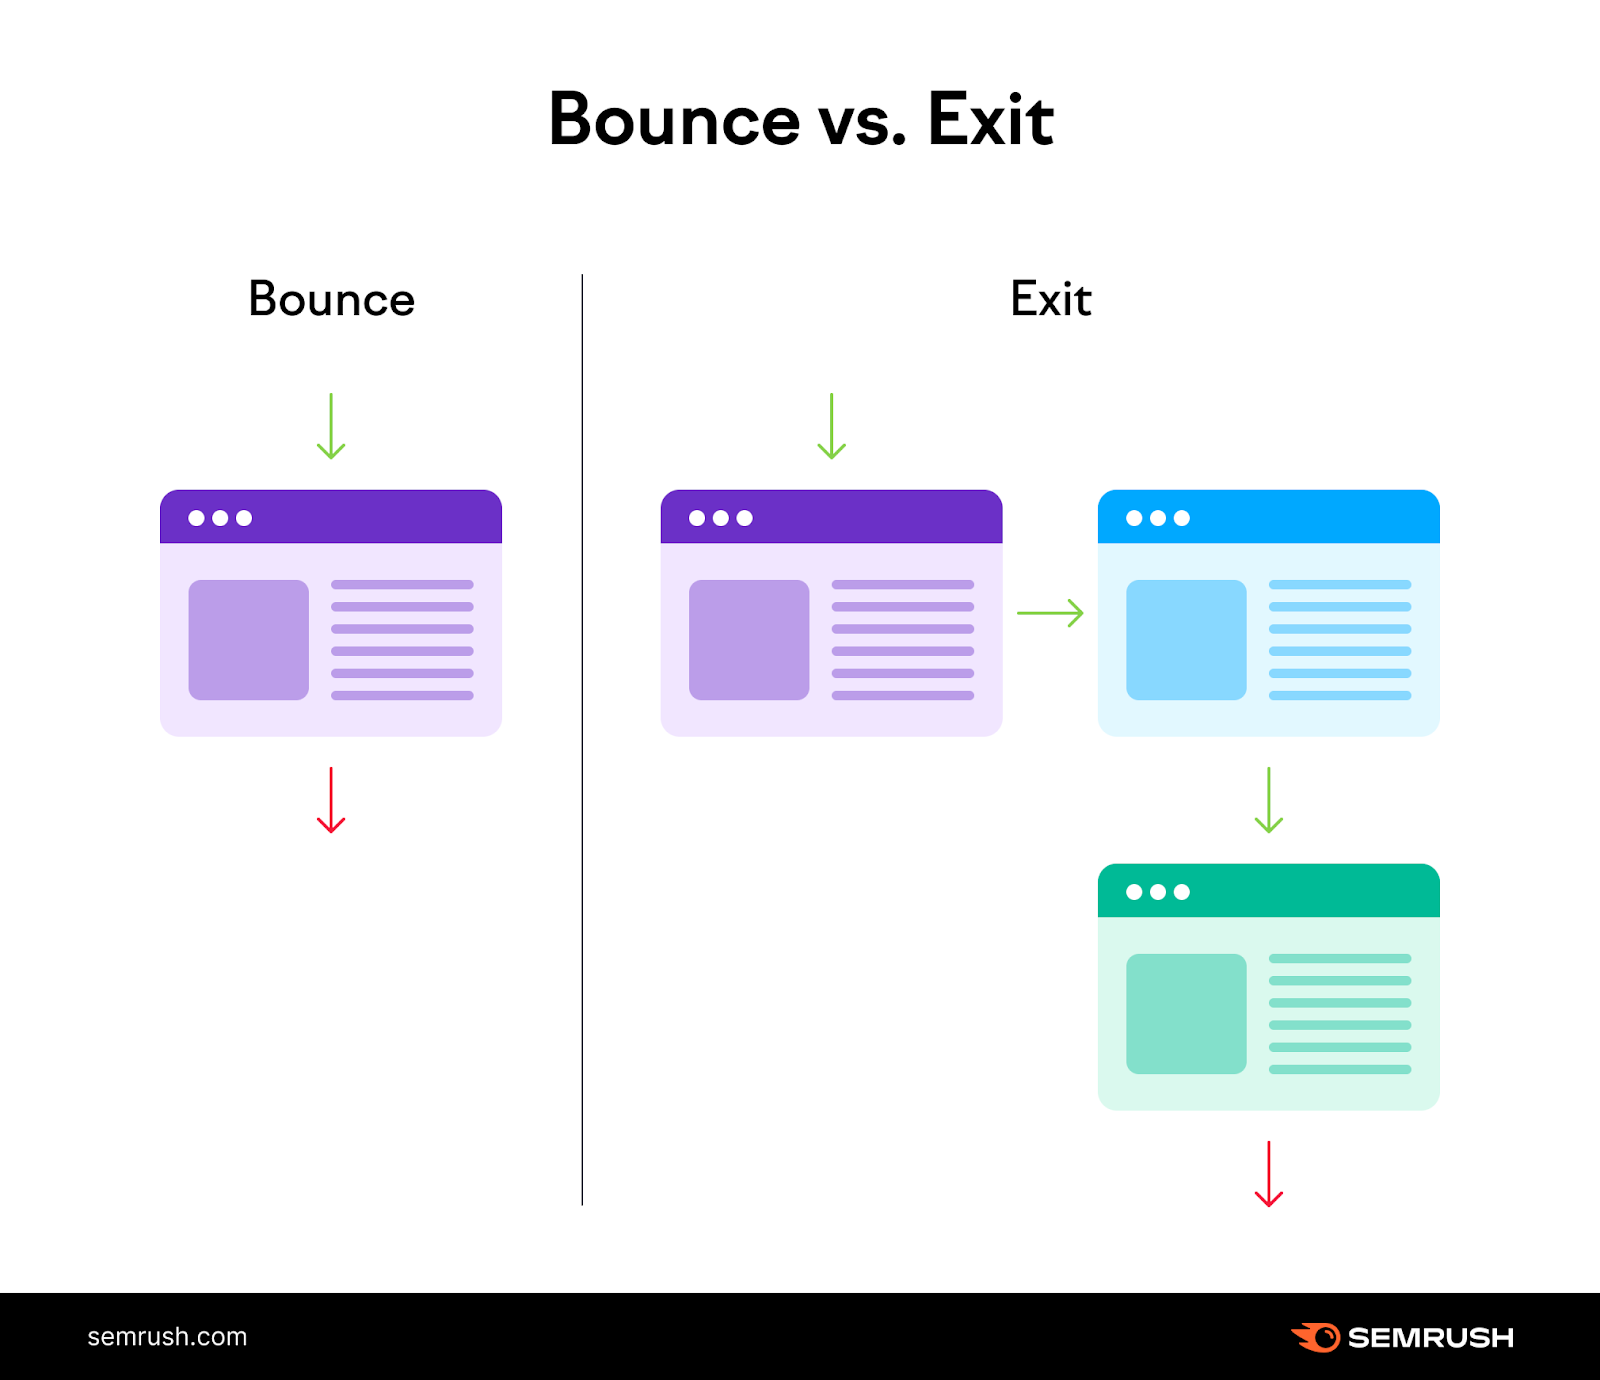 Bounce vs exit rate illustration